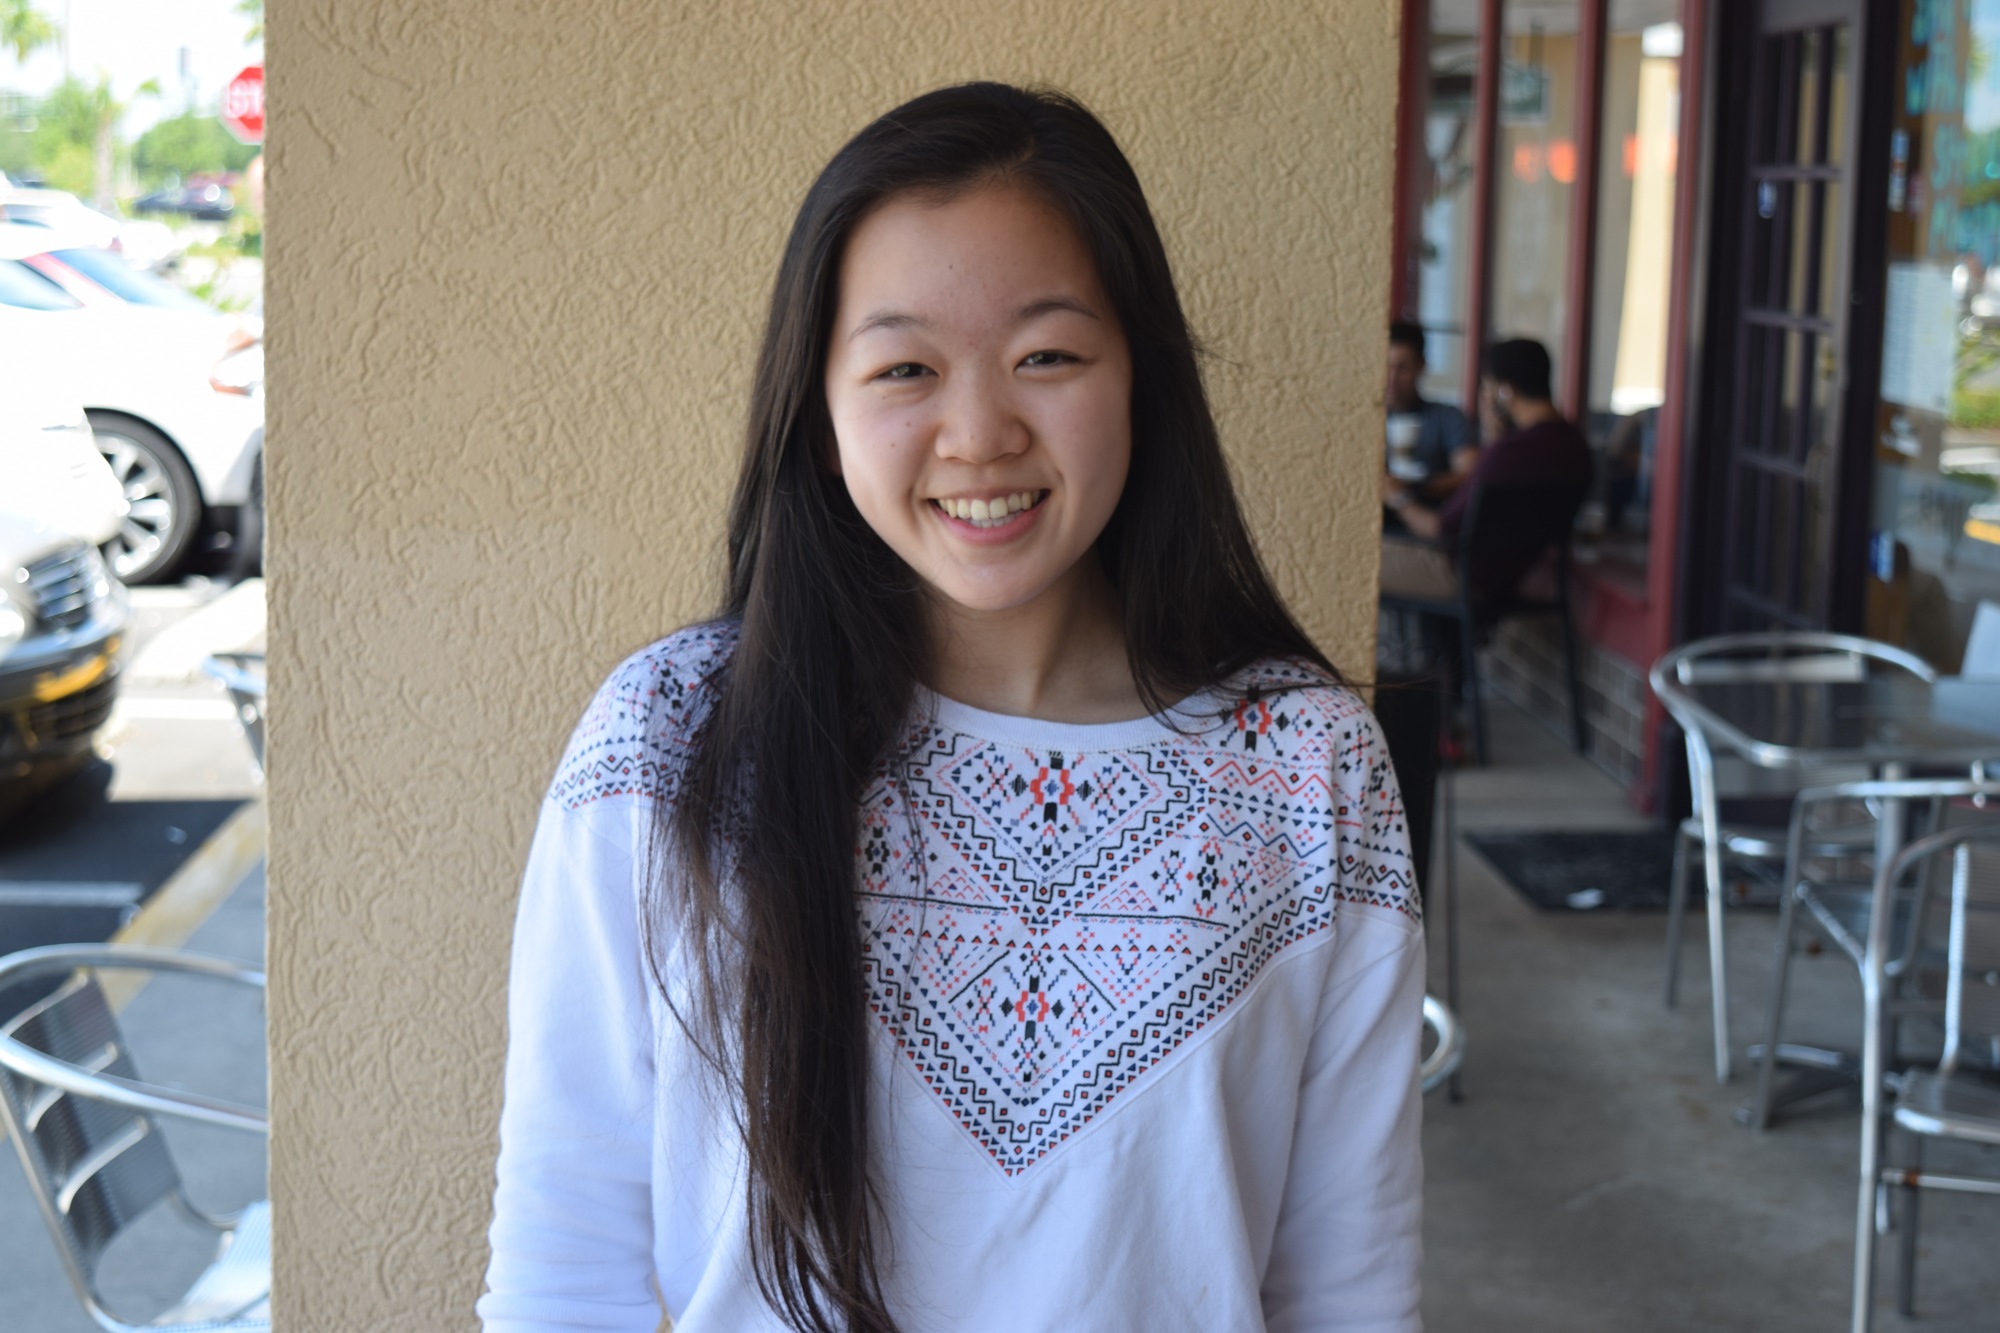 Dr. Phillips High senior Anli Chen is one of two Windermere-area National Merit Scholar finalists.